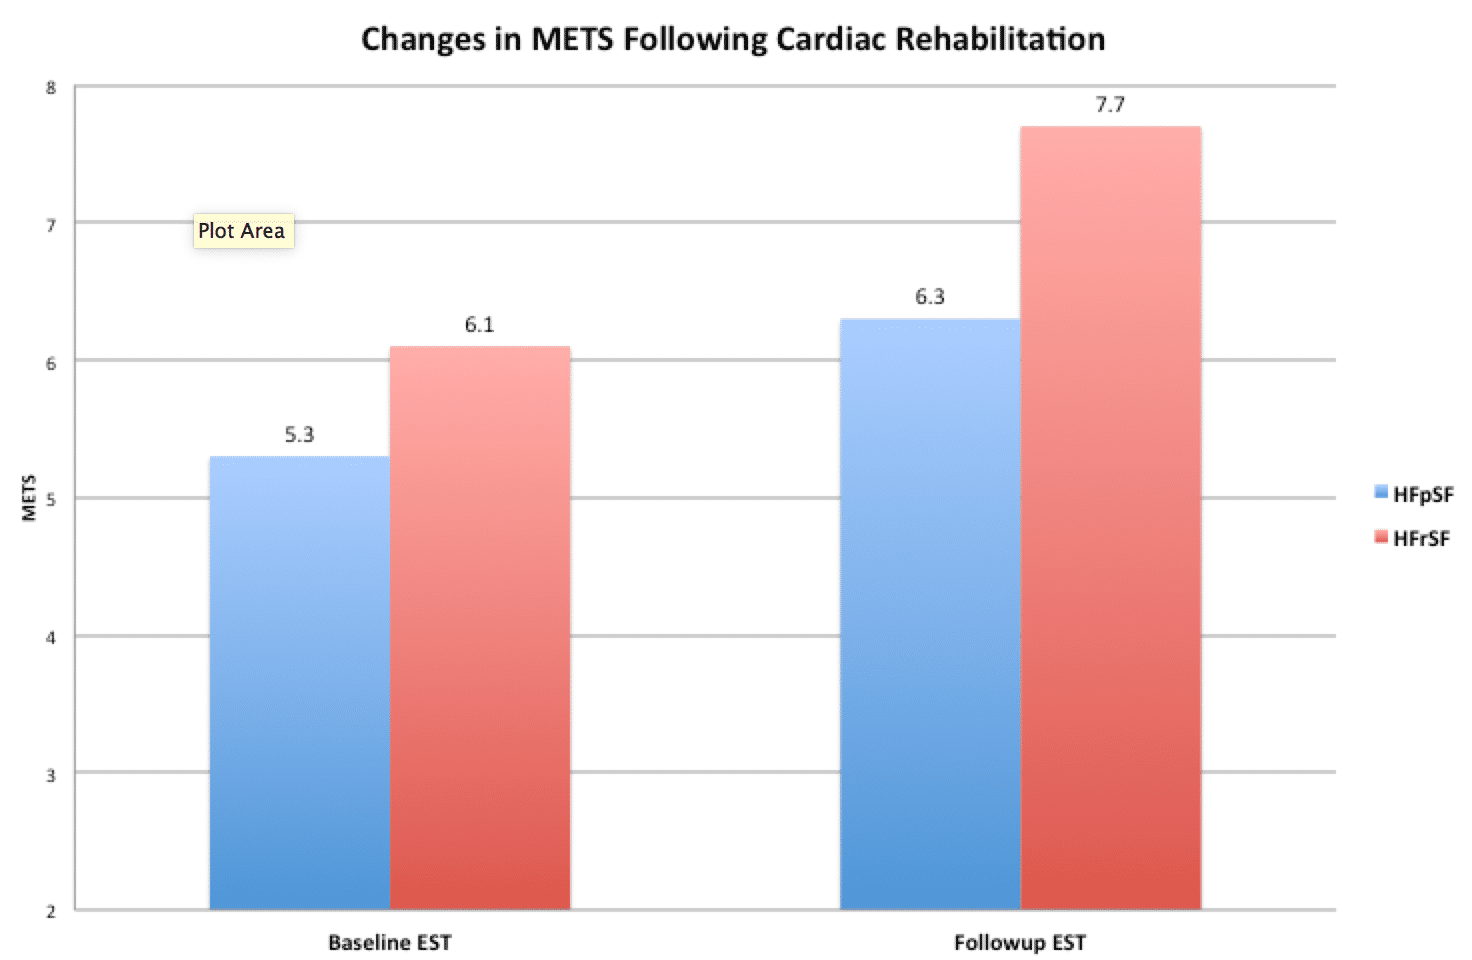 Average changes in METS in patients with and without systolic dysfunction